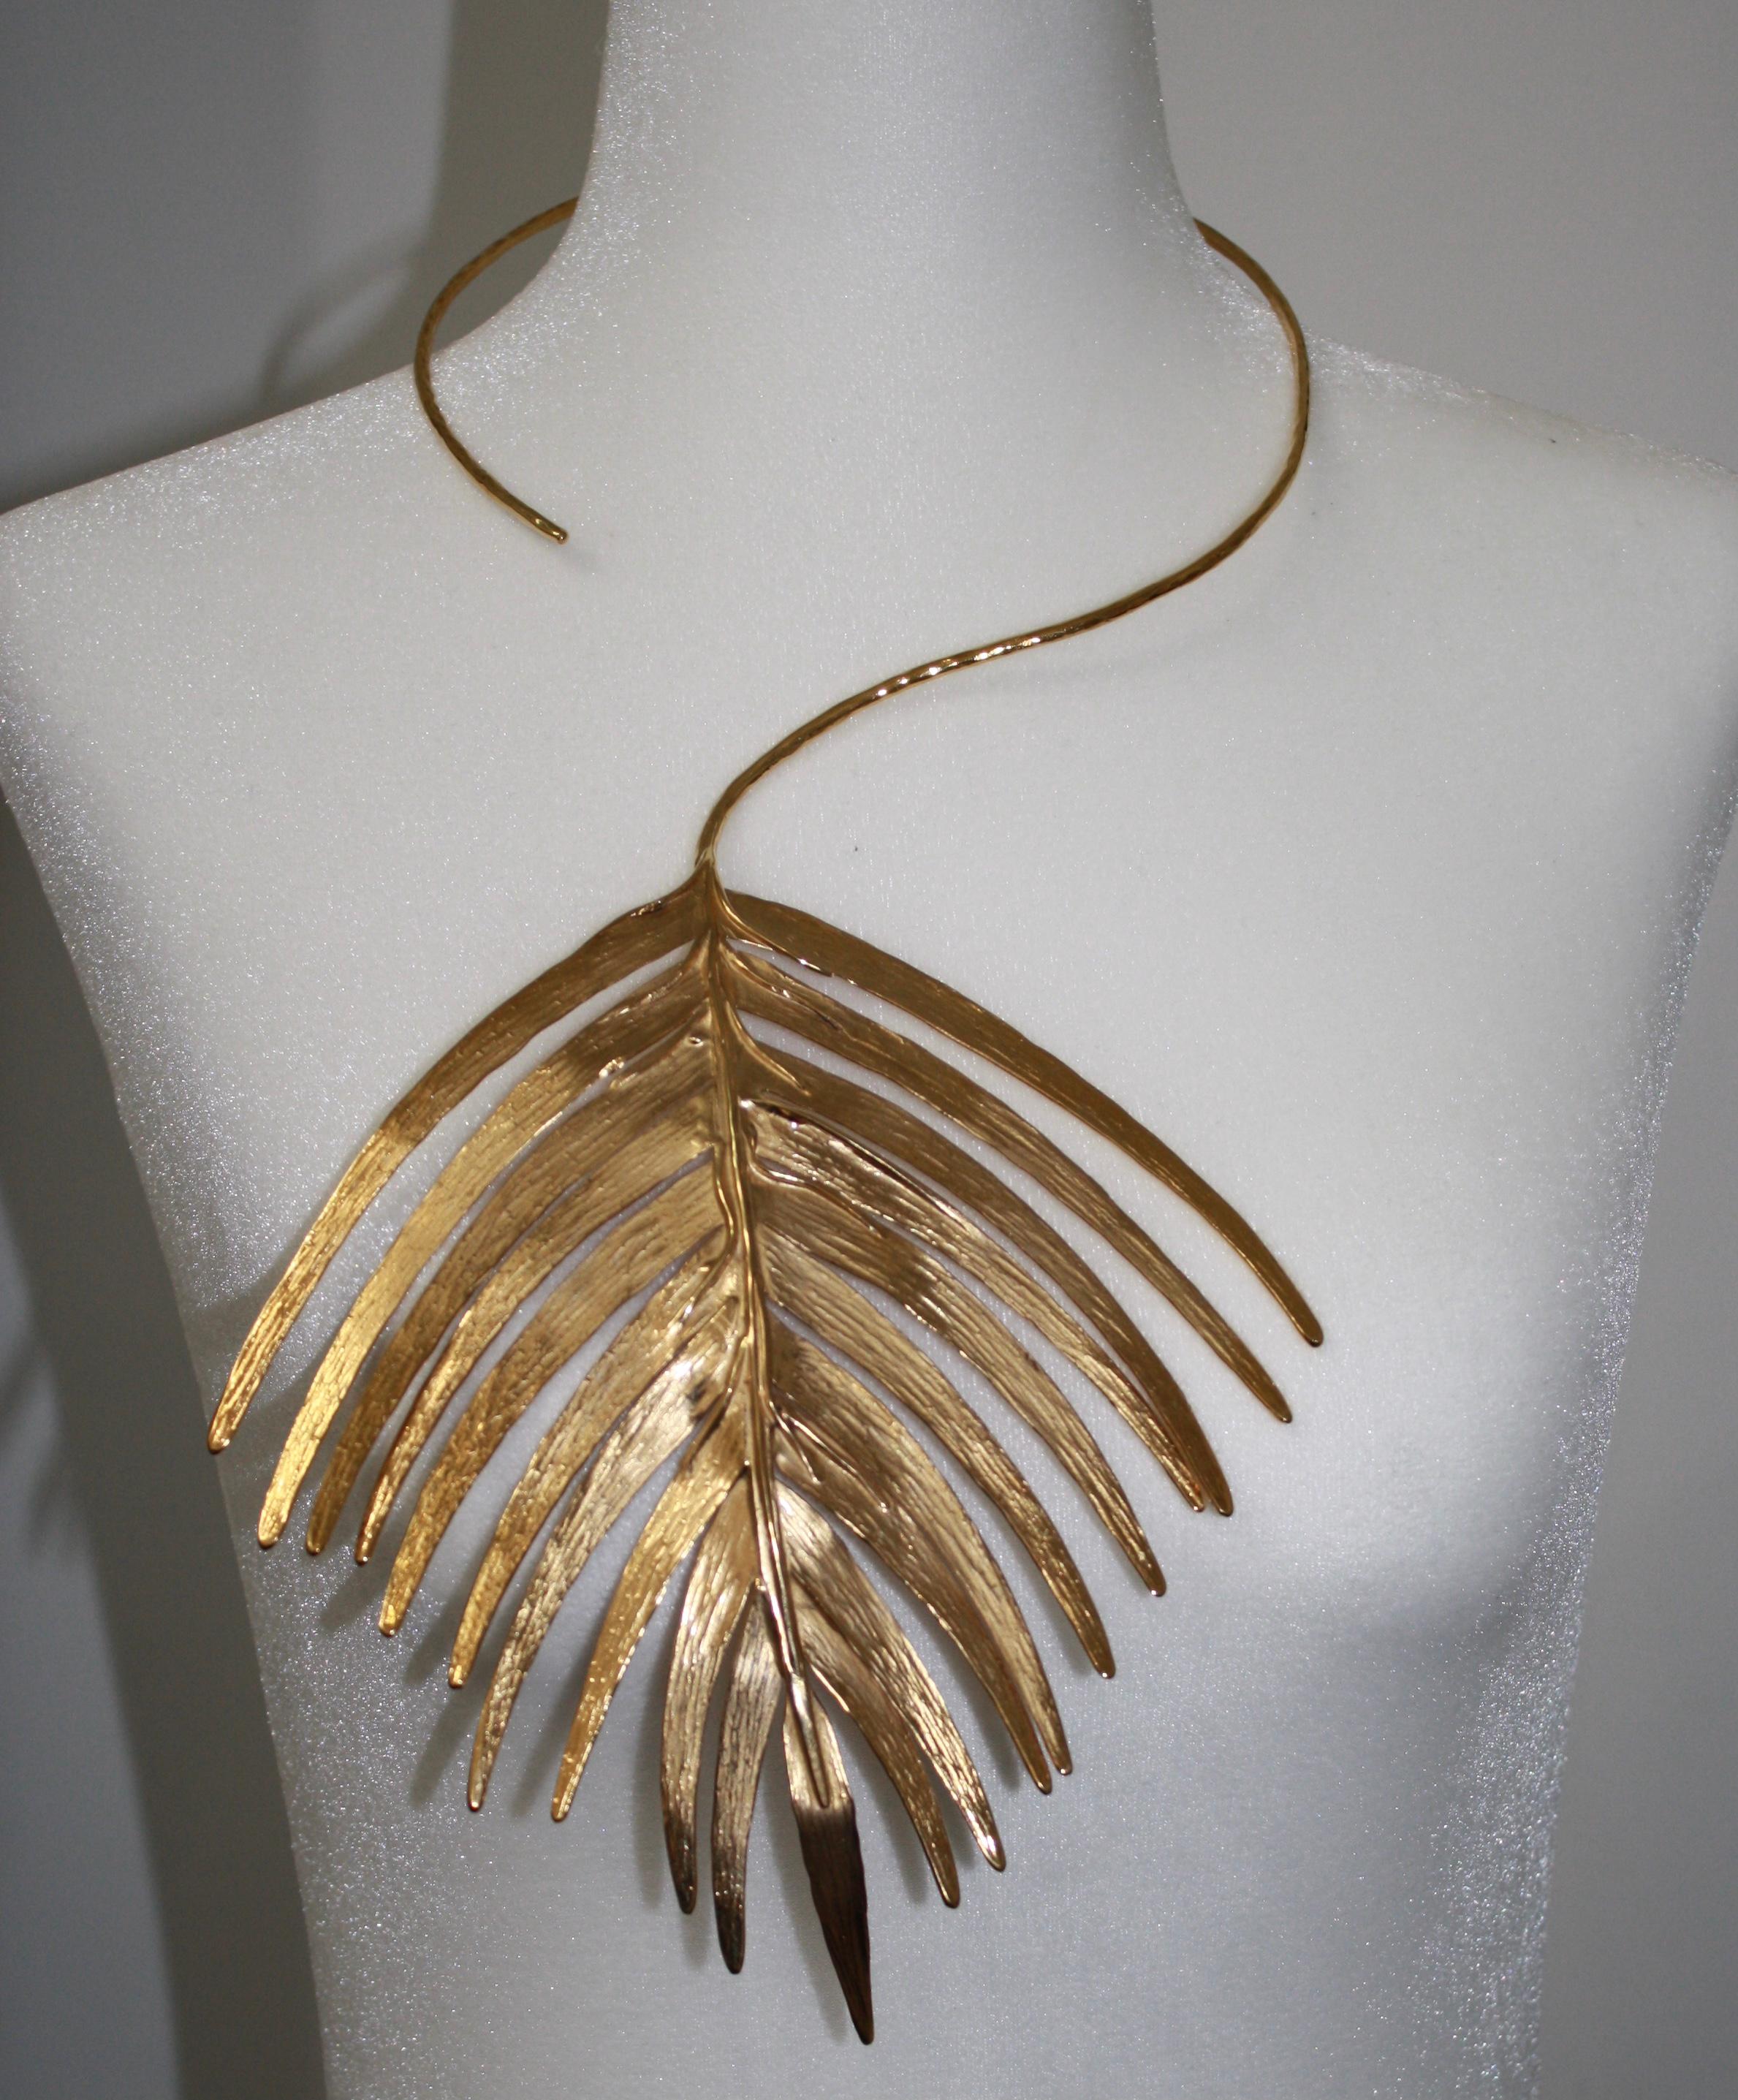 24KT gilded brass limited serie. Metal is very flexible allowing for adjustment around the neck as well as on the bust.